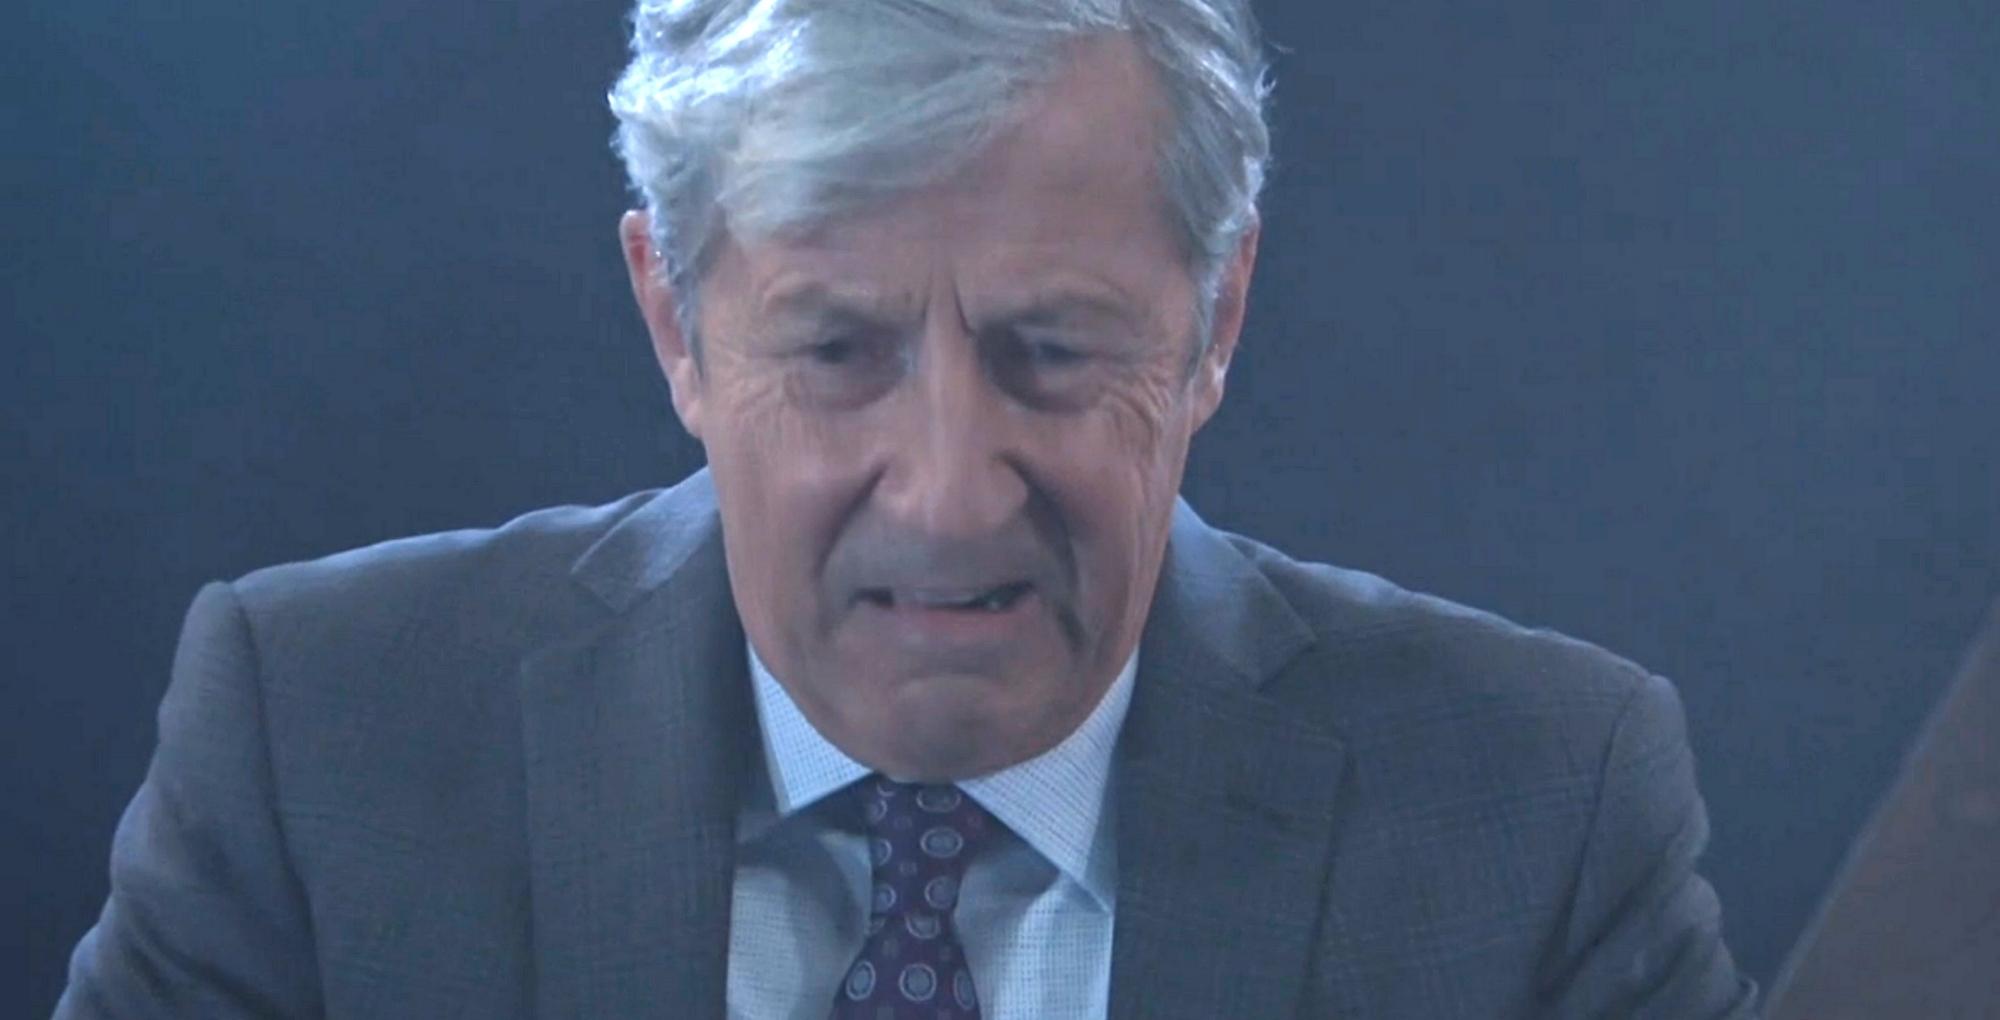 the general hospital recap for march 28, 2023, has victor cassadine murdering eileen